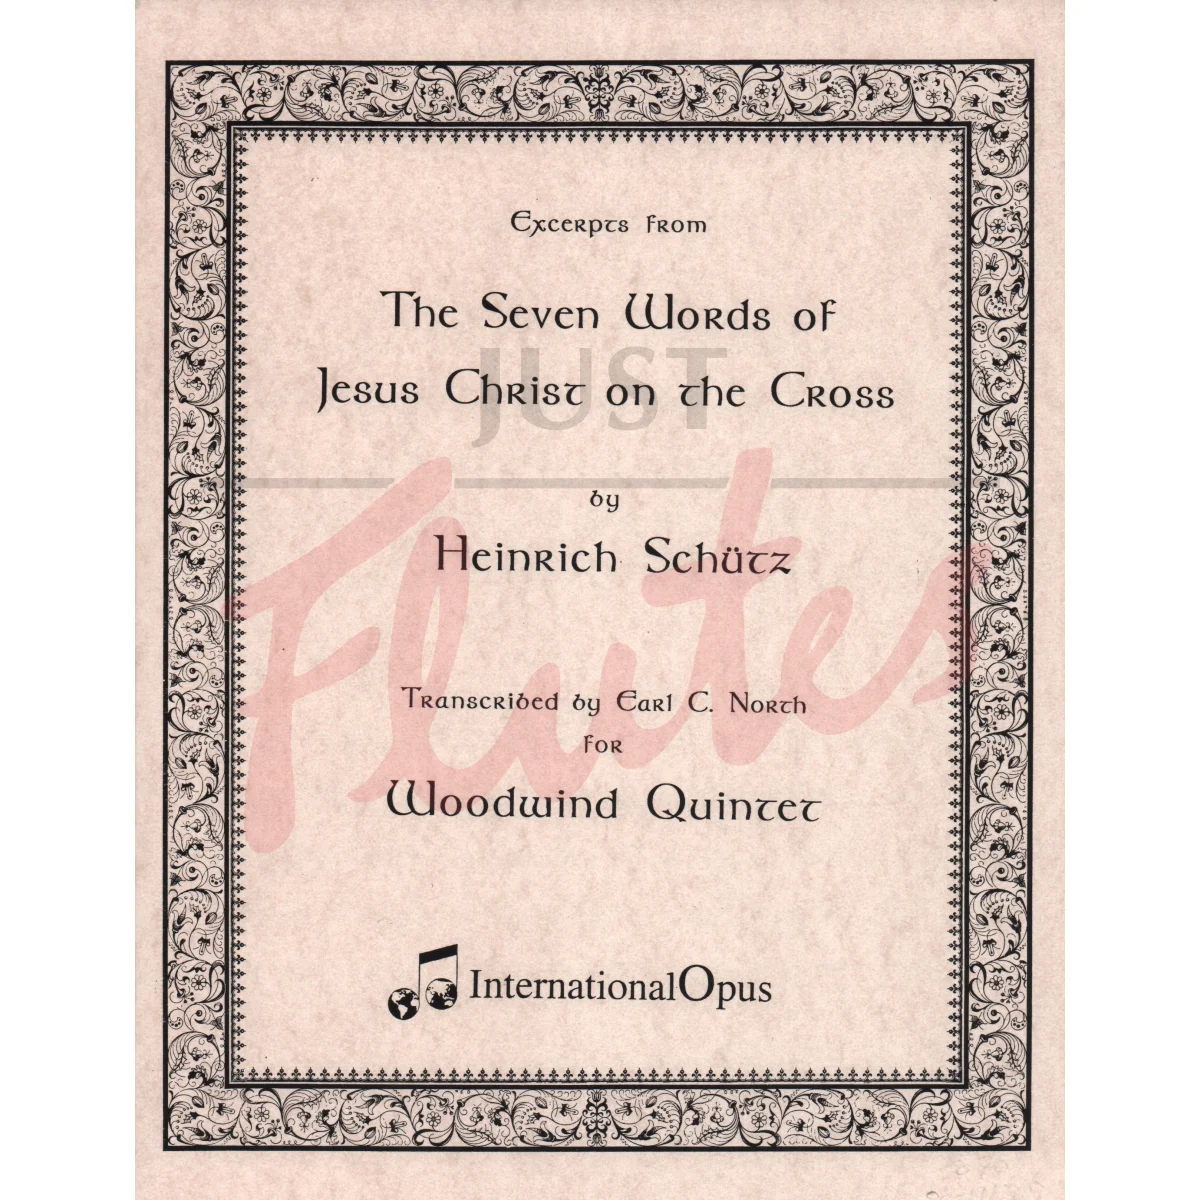 Excerpts from The Seven Words of Jesus Christ on the Cross for Woodwind Quintet